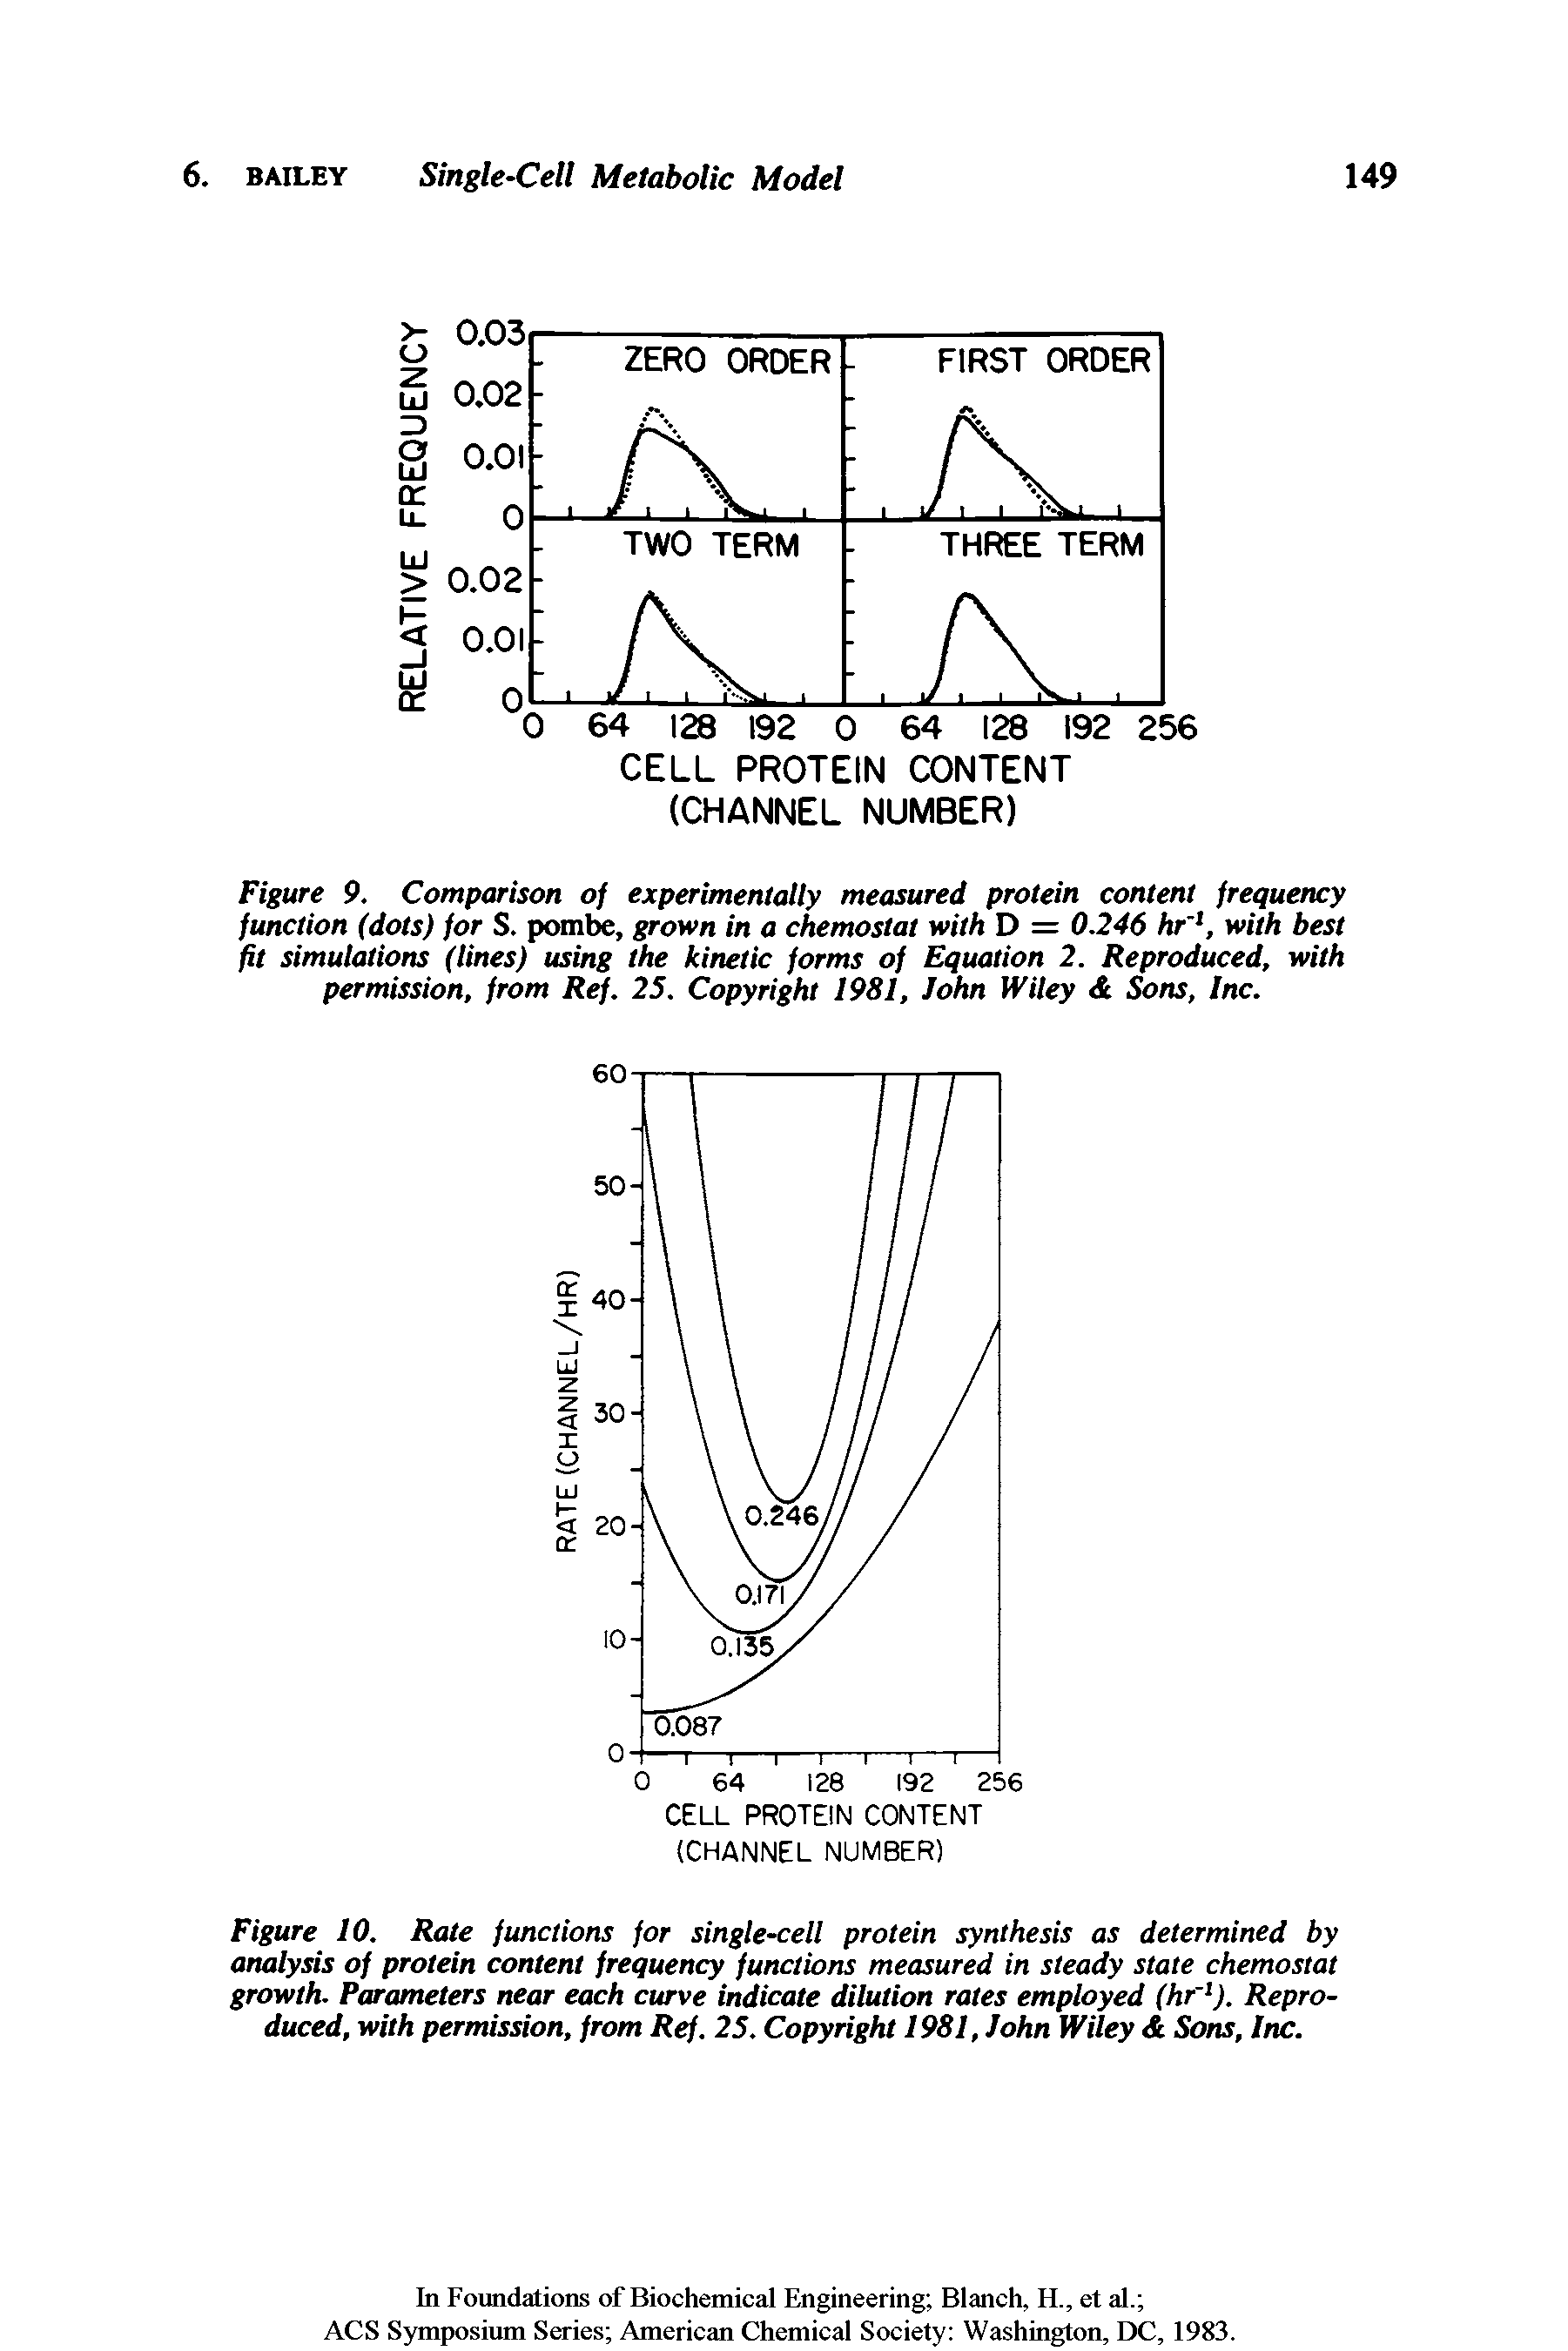 Figure 9. Comparison of experimentally measured protein content frequency function (dots) for S. pombe, grown in a chemostat with D = 0.246 hr , with best fit simulations (lines) using the kinetic forms of Equation 2. Reproduced, with permission, from Ref. 25. Copyright 1981, John Wiley Sons, Inc.